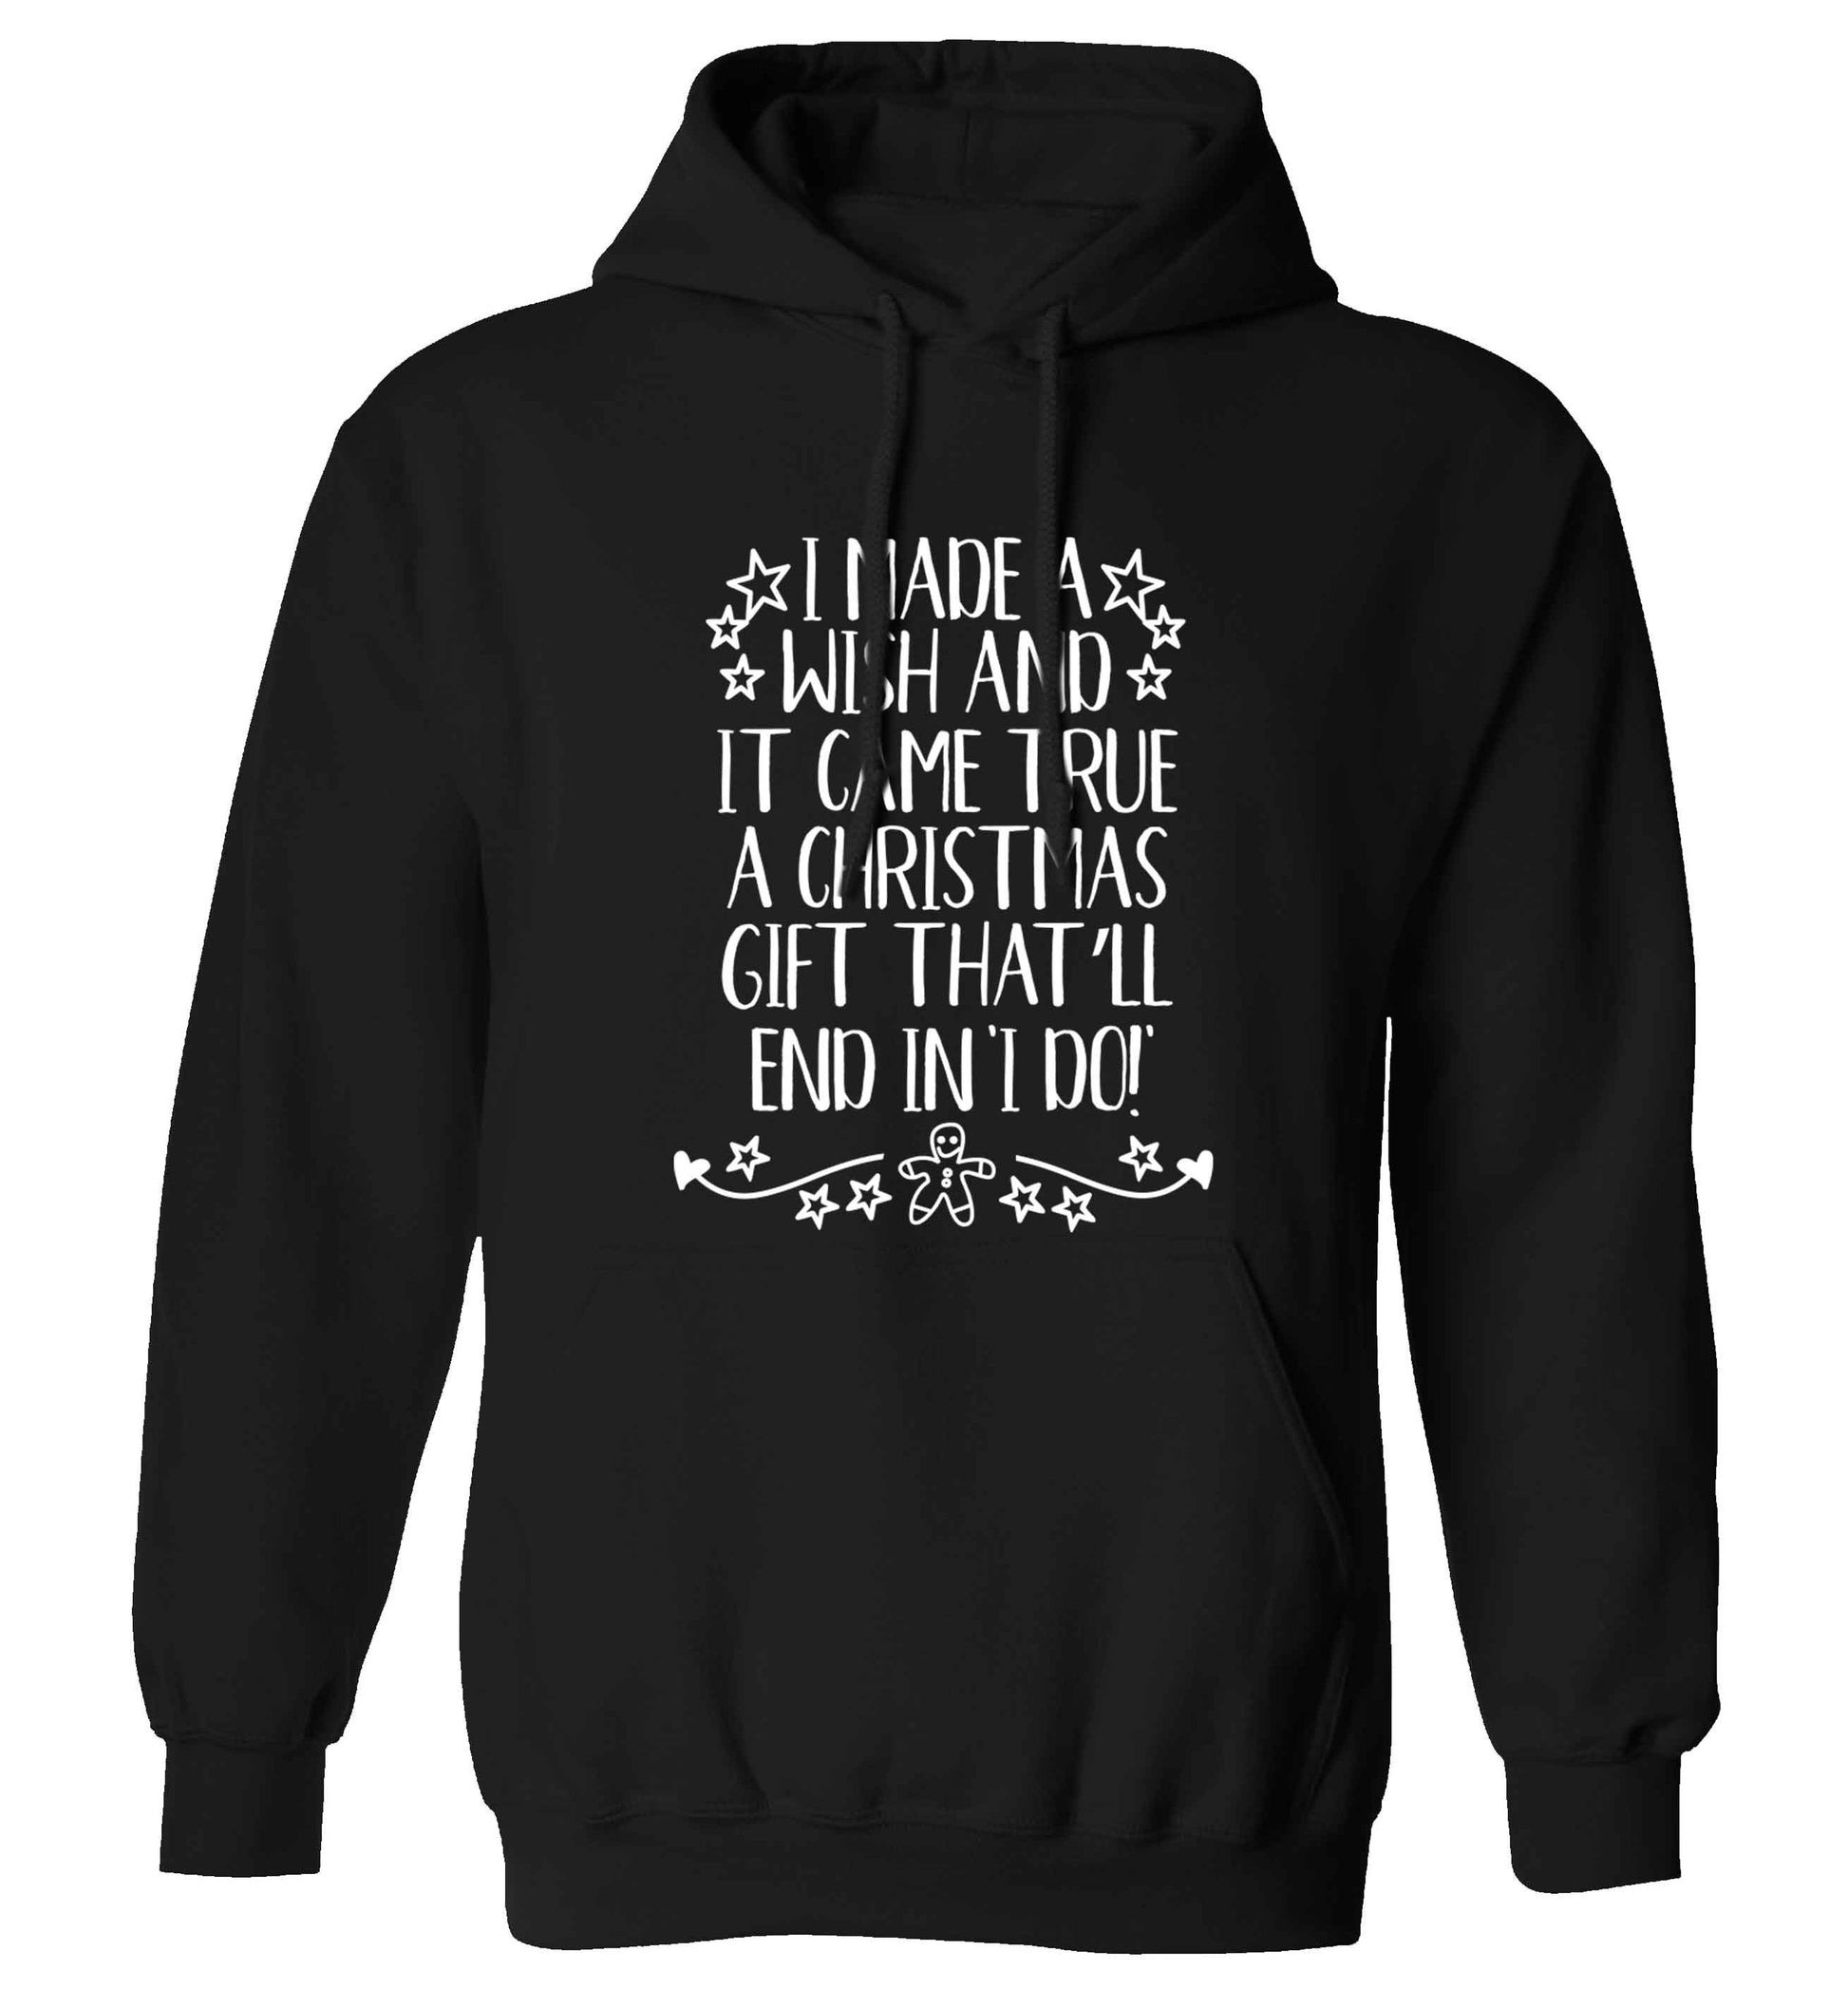 I made a wish and it came true a Christmas gift that'll end in 'I do' adults unisex black hoodie 2XL